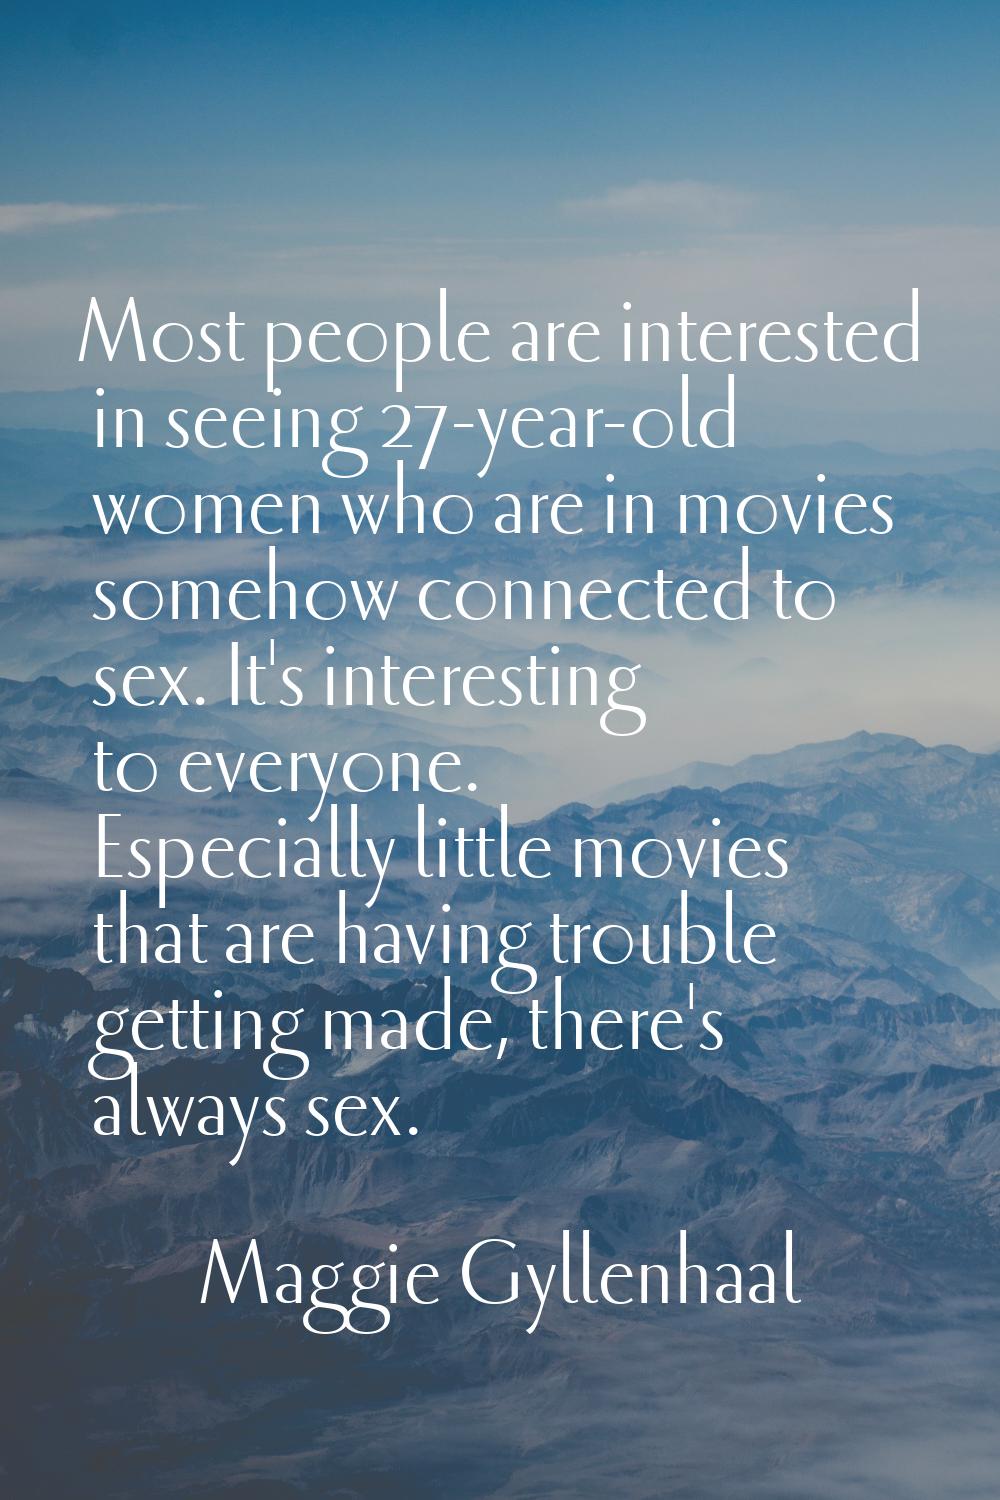 Most people are interested in seeing 27-year-old women who are in movies somehow connected to sex. 